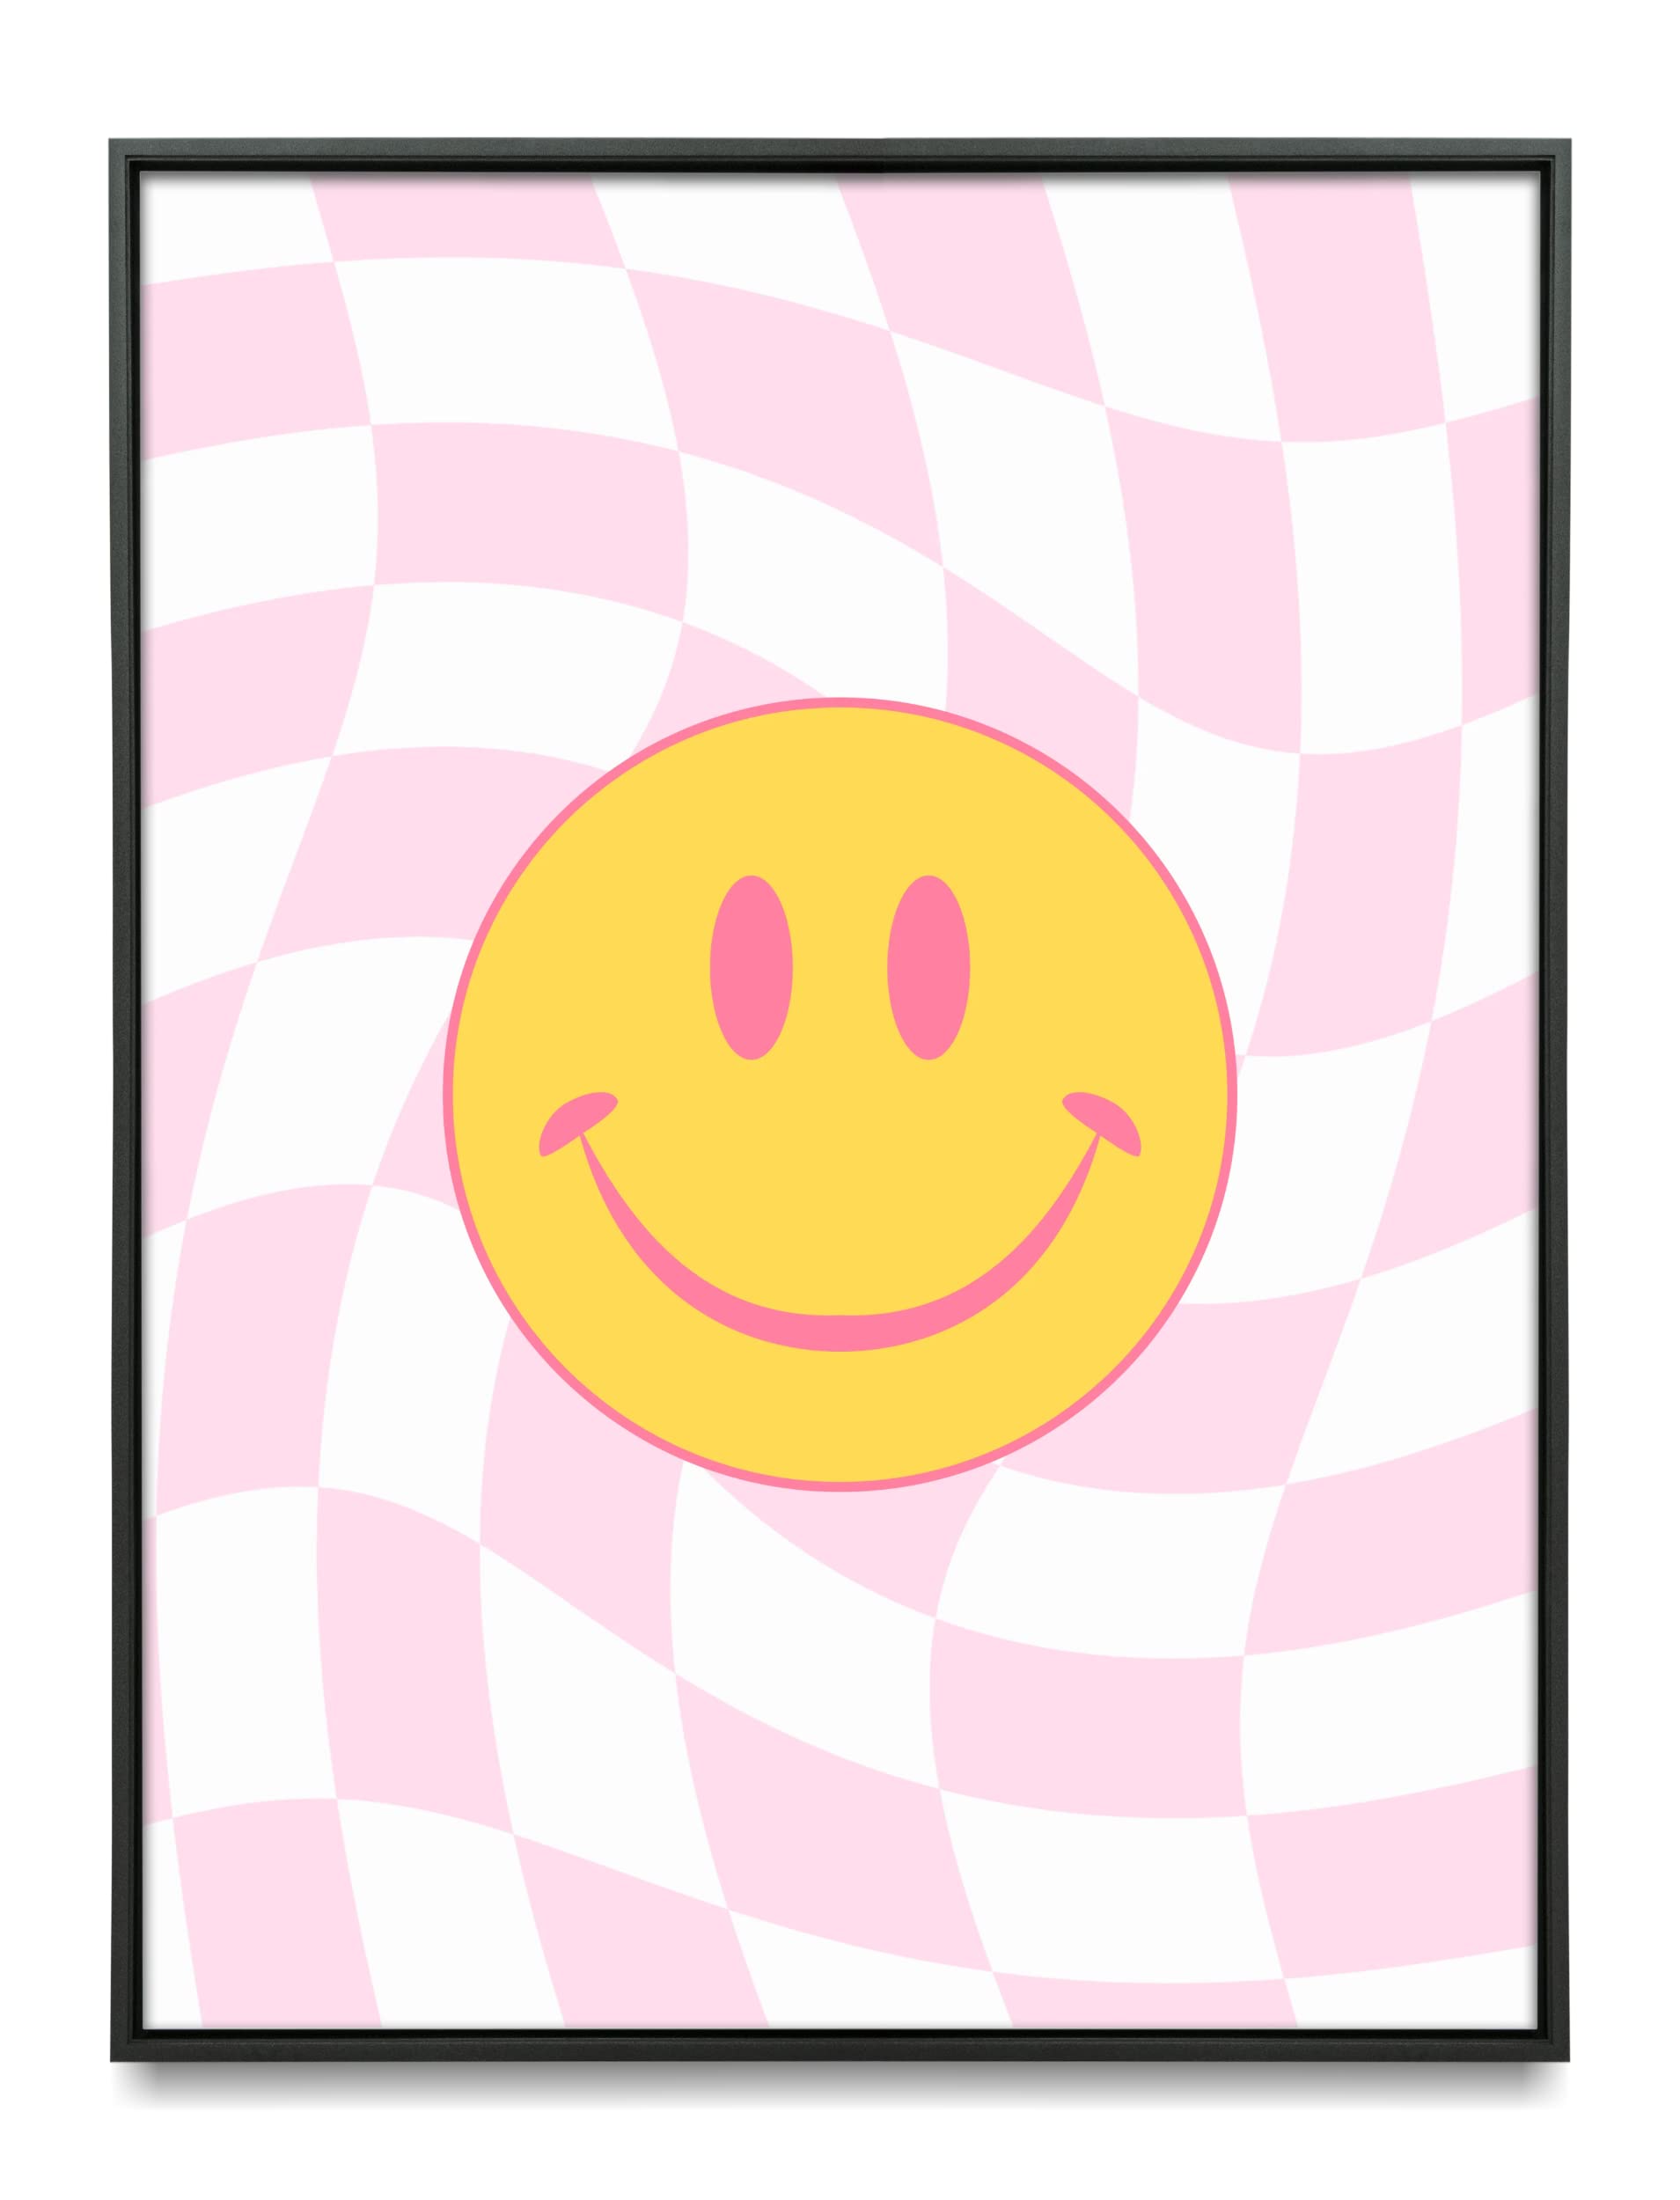 Preppy Smiley Face Wallpaper Discover more Aesthetic flower Green Pink  seamless pattern wallp in 2023  Cute summer wallpapers Preppy wallpaper  Wallpaper iphone boho